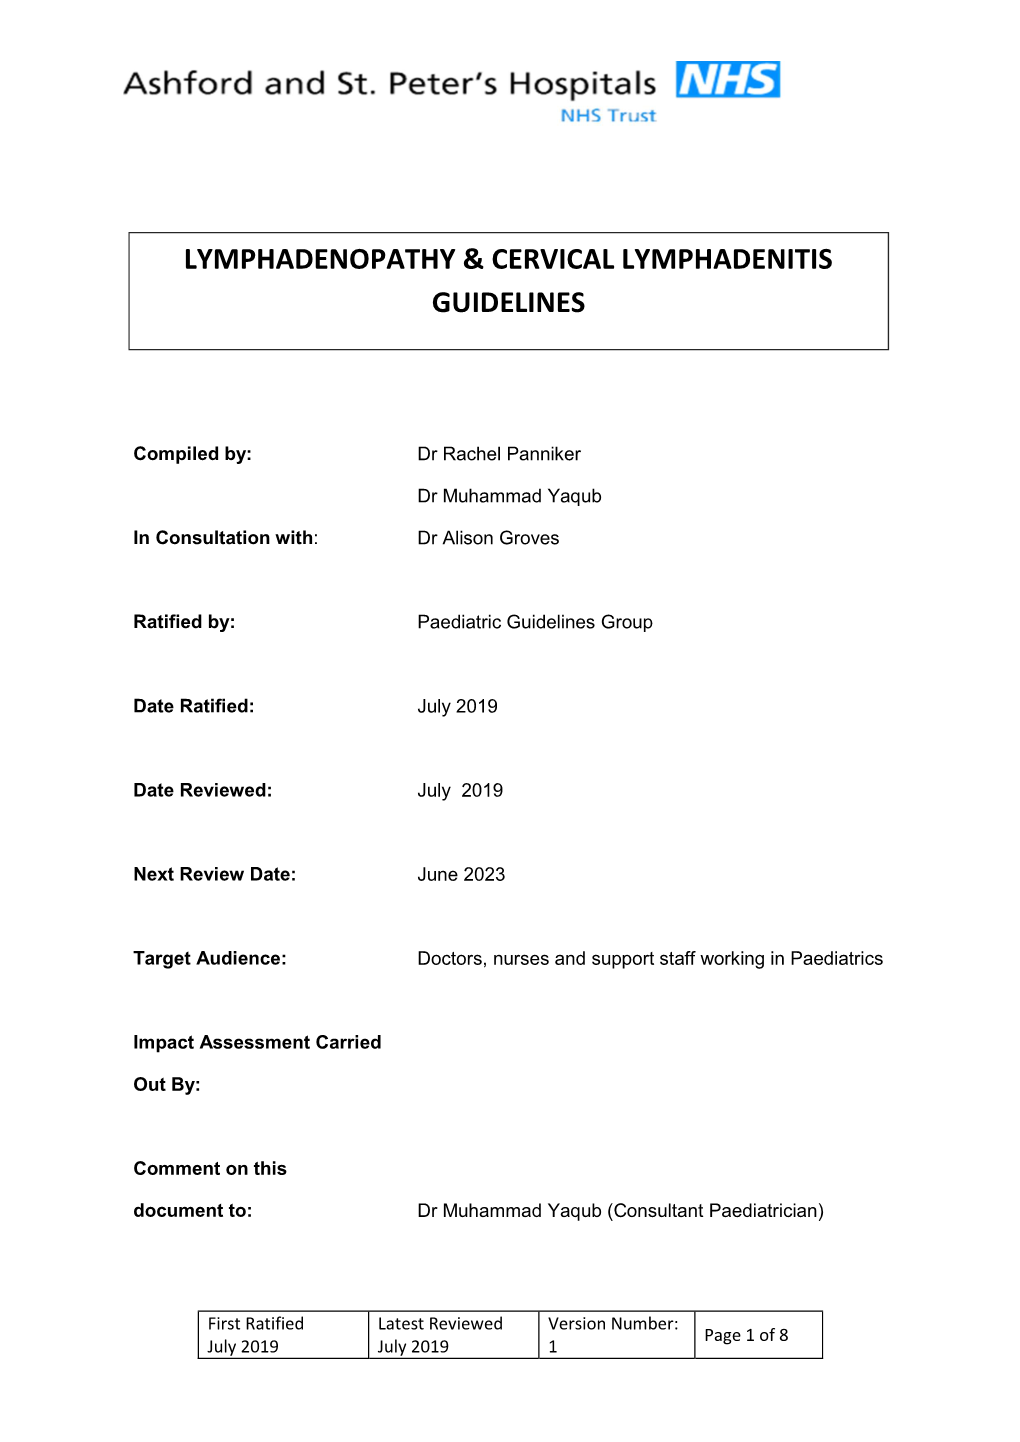 Lymphadenopathy & Cervical Lymphadenitis Guidelines